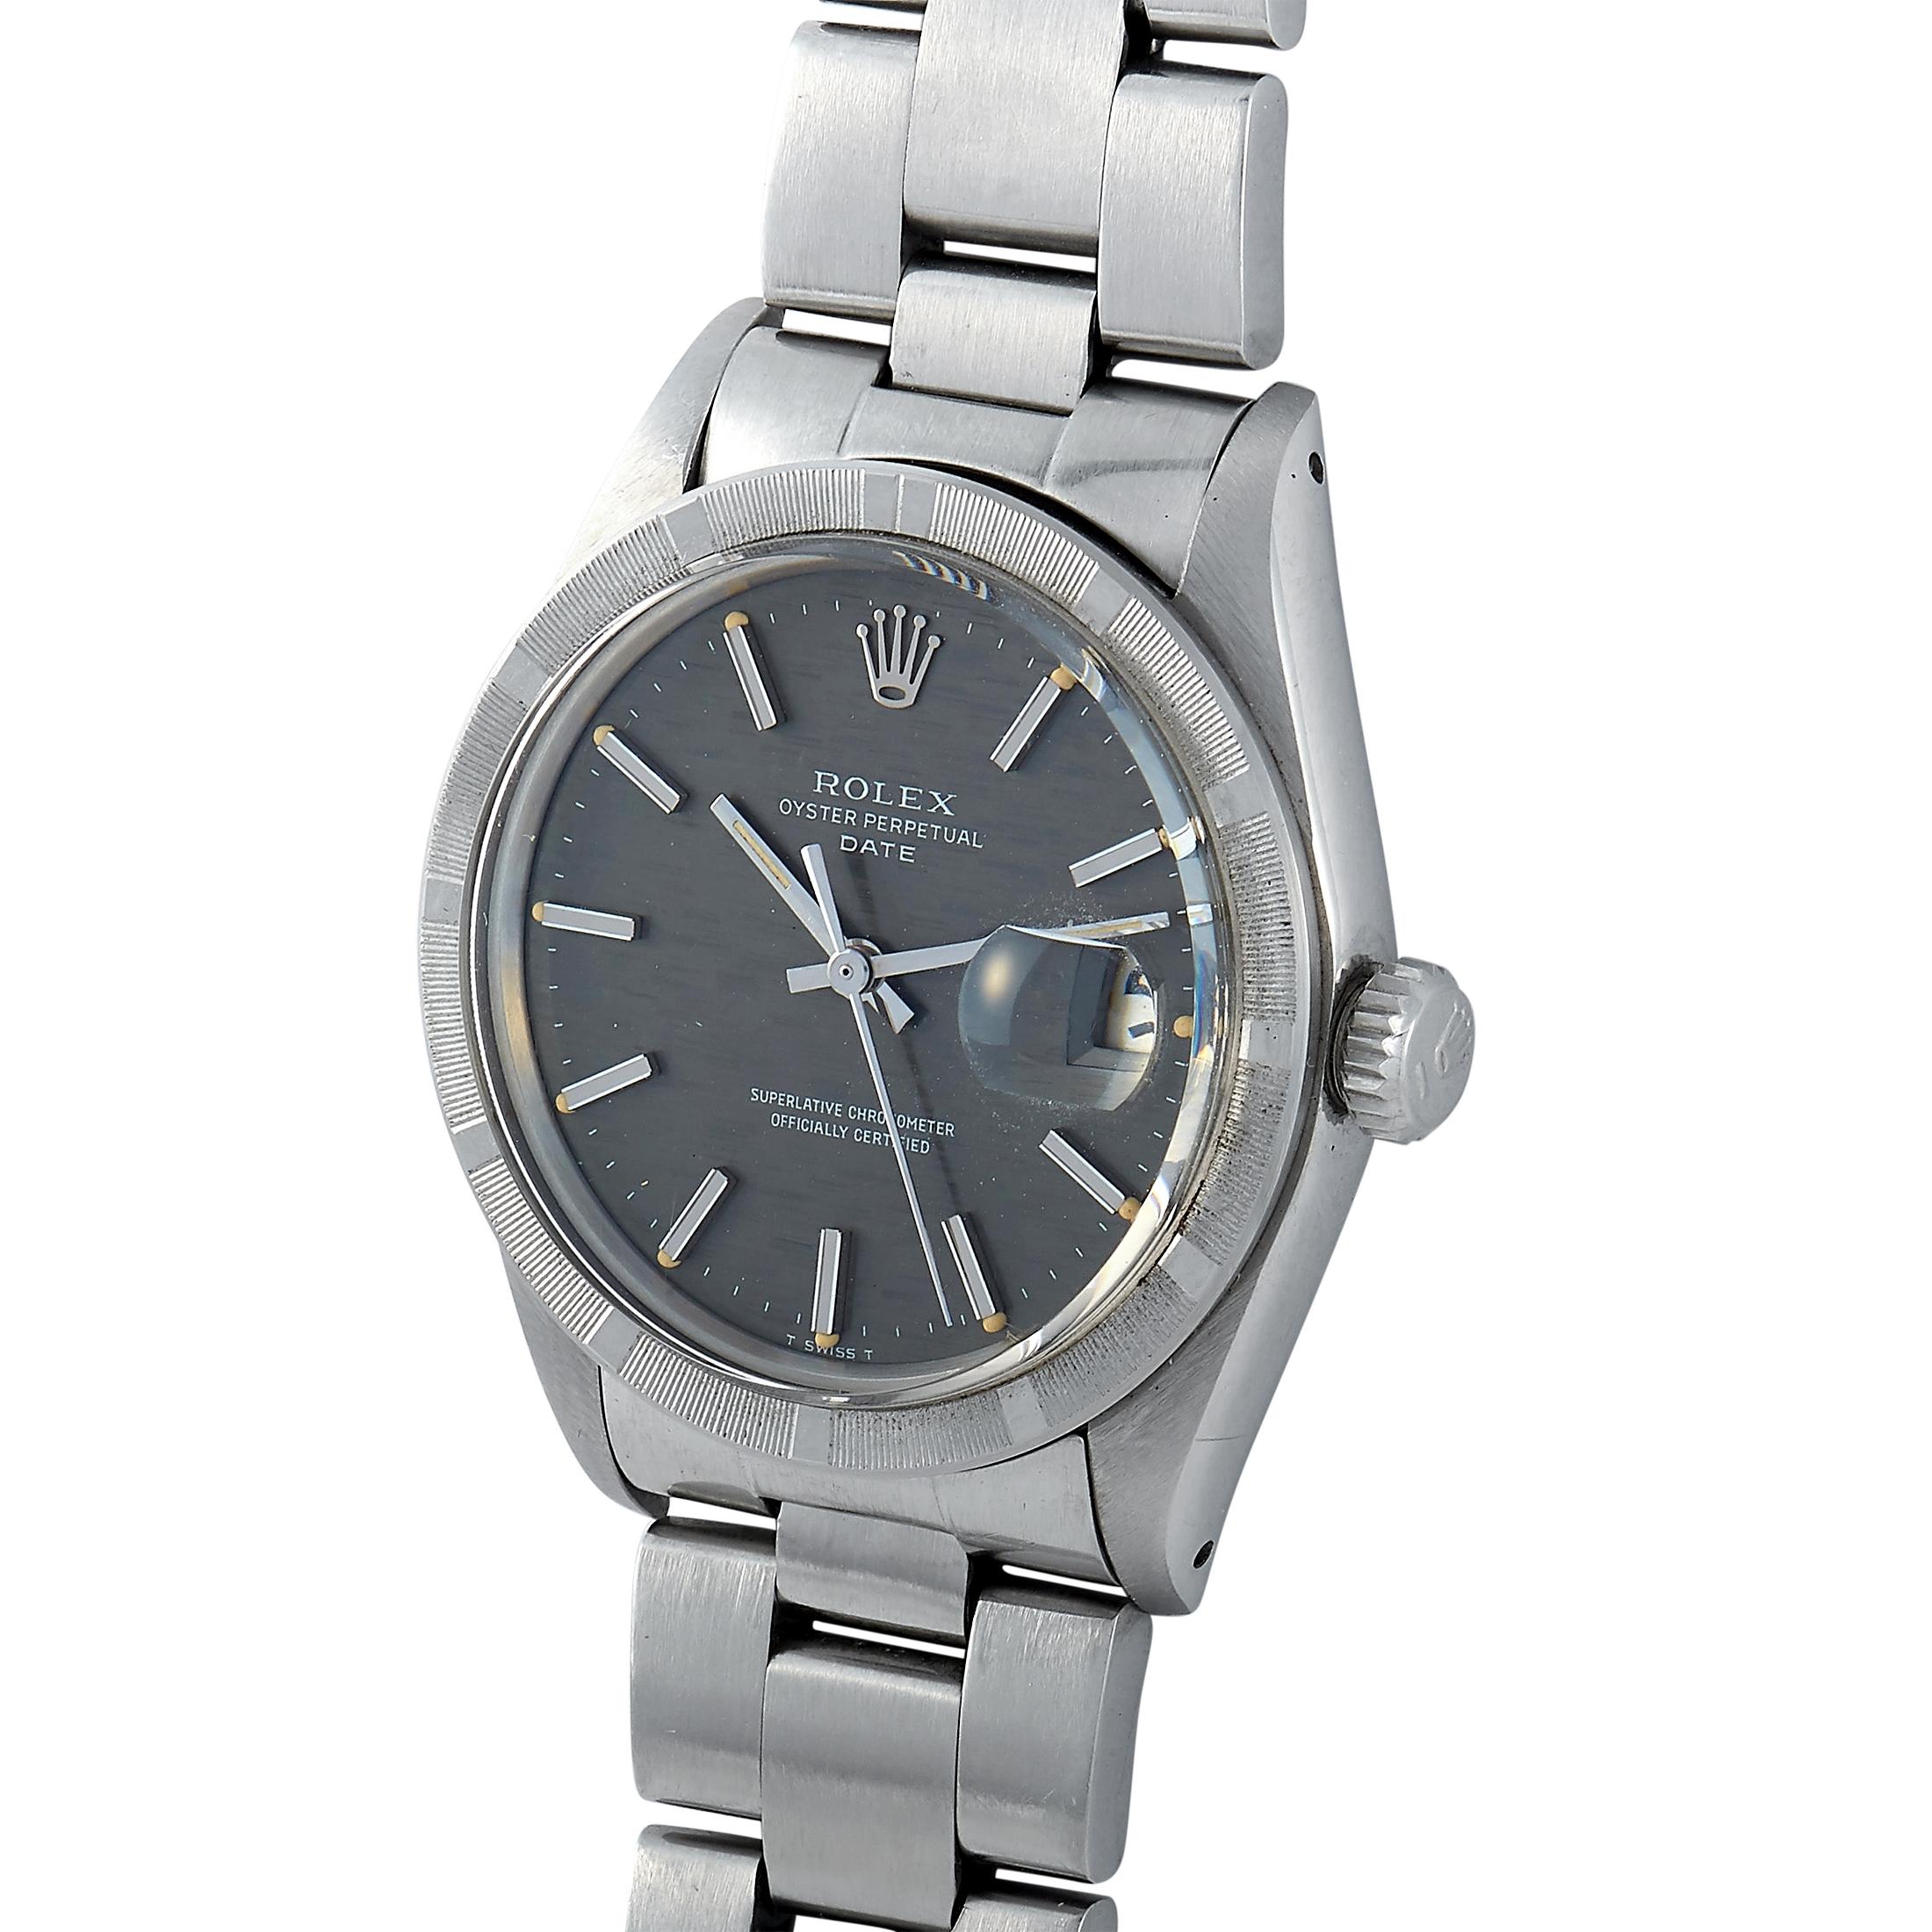 The vintage Rolex Oyster Perpetual Date watch, reference number 1501, boasts a waterproof stainless steel case that is fitted with an engine turned stainless steel bezel. The case measures 34 mm in diameter and is presented on a stainless steel